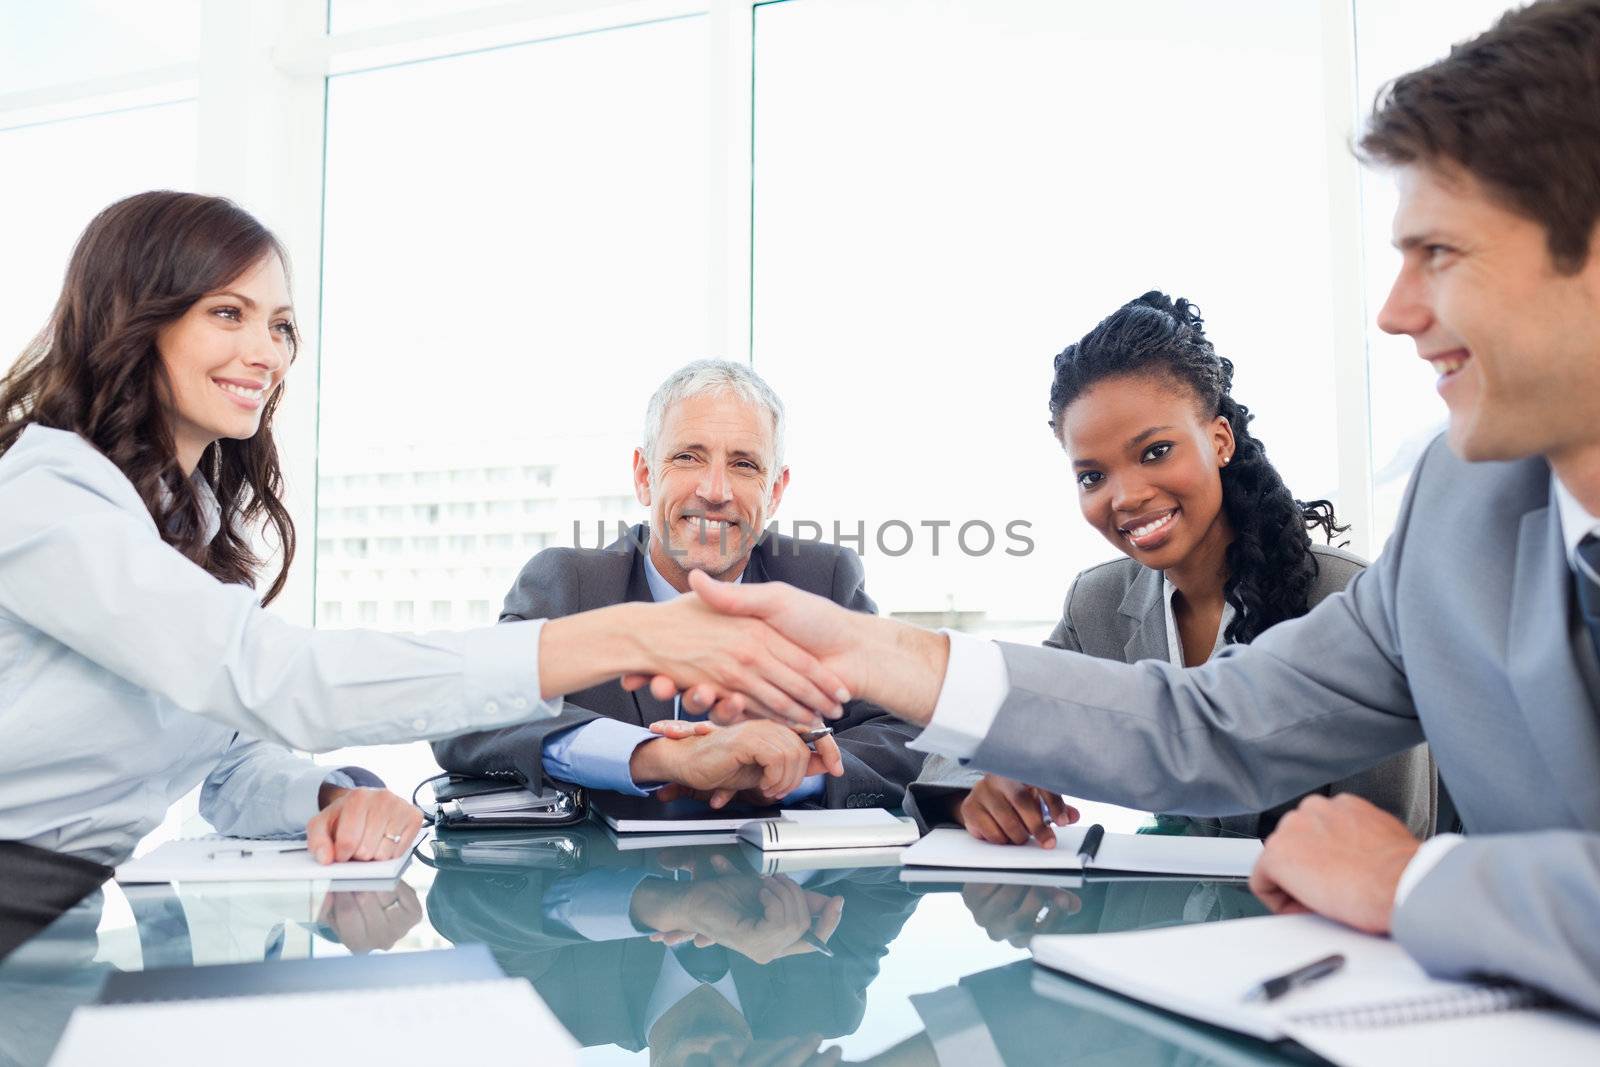 Young smiling executives shaking hands in front of their manager and a colleague